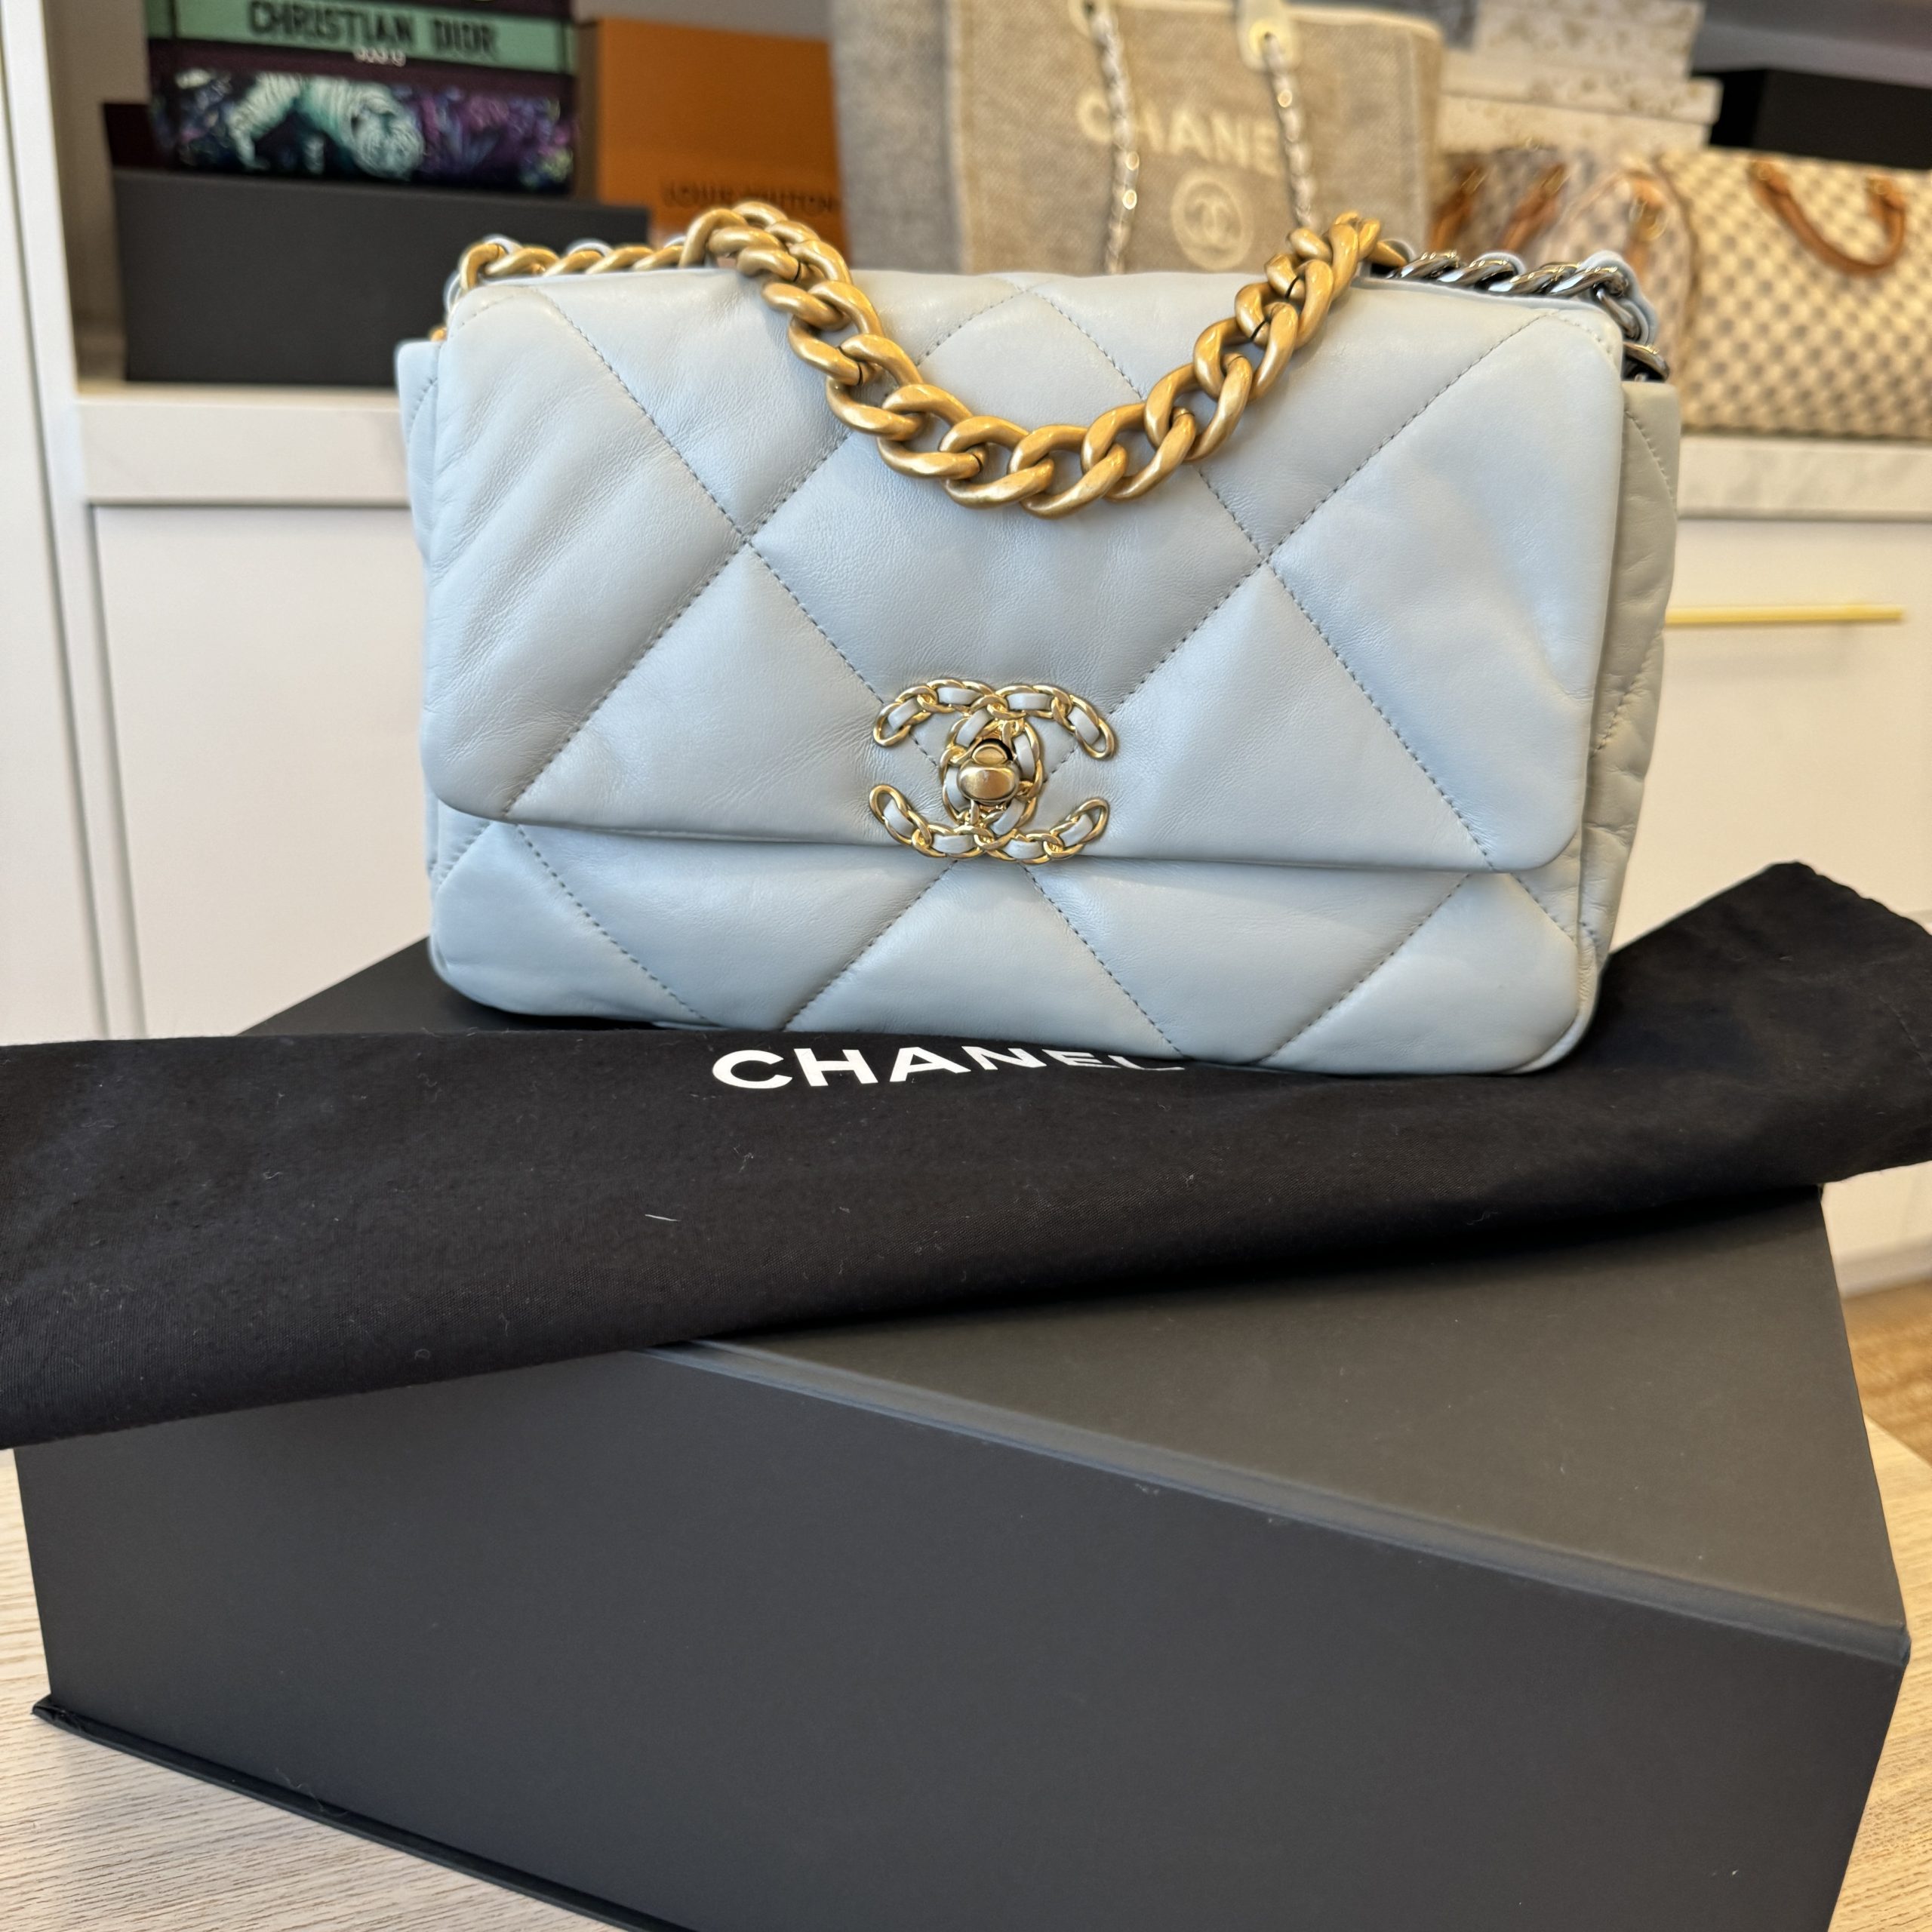 Chanel Lambskin Quilted Medium Chanel 19 Flap Light Blue